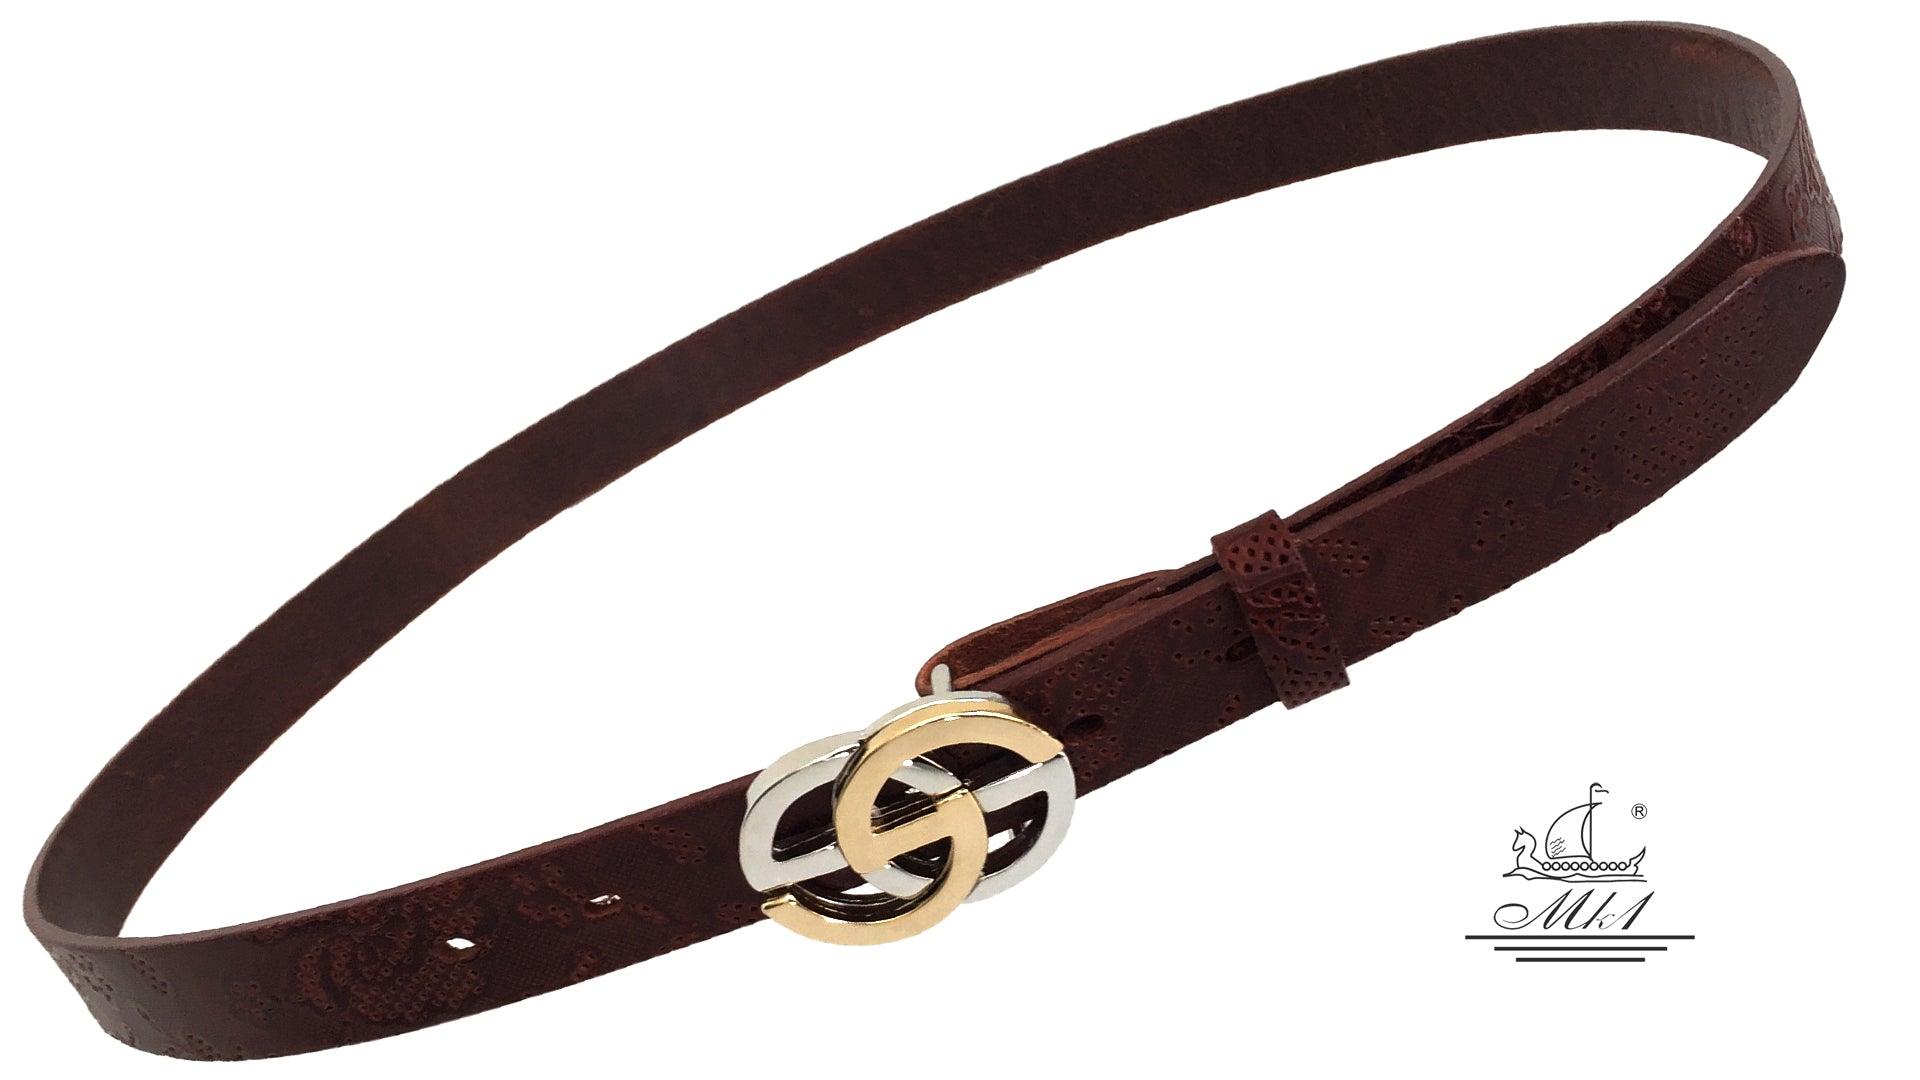 Women's thin belt handcrafted from brown natural leather with floral design. 101689/25k-dt